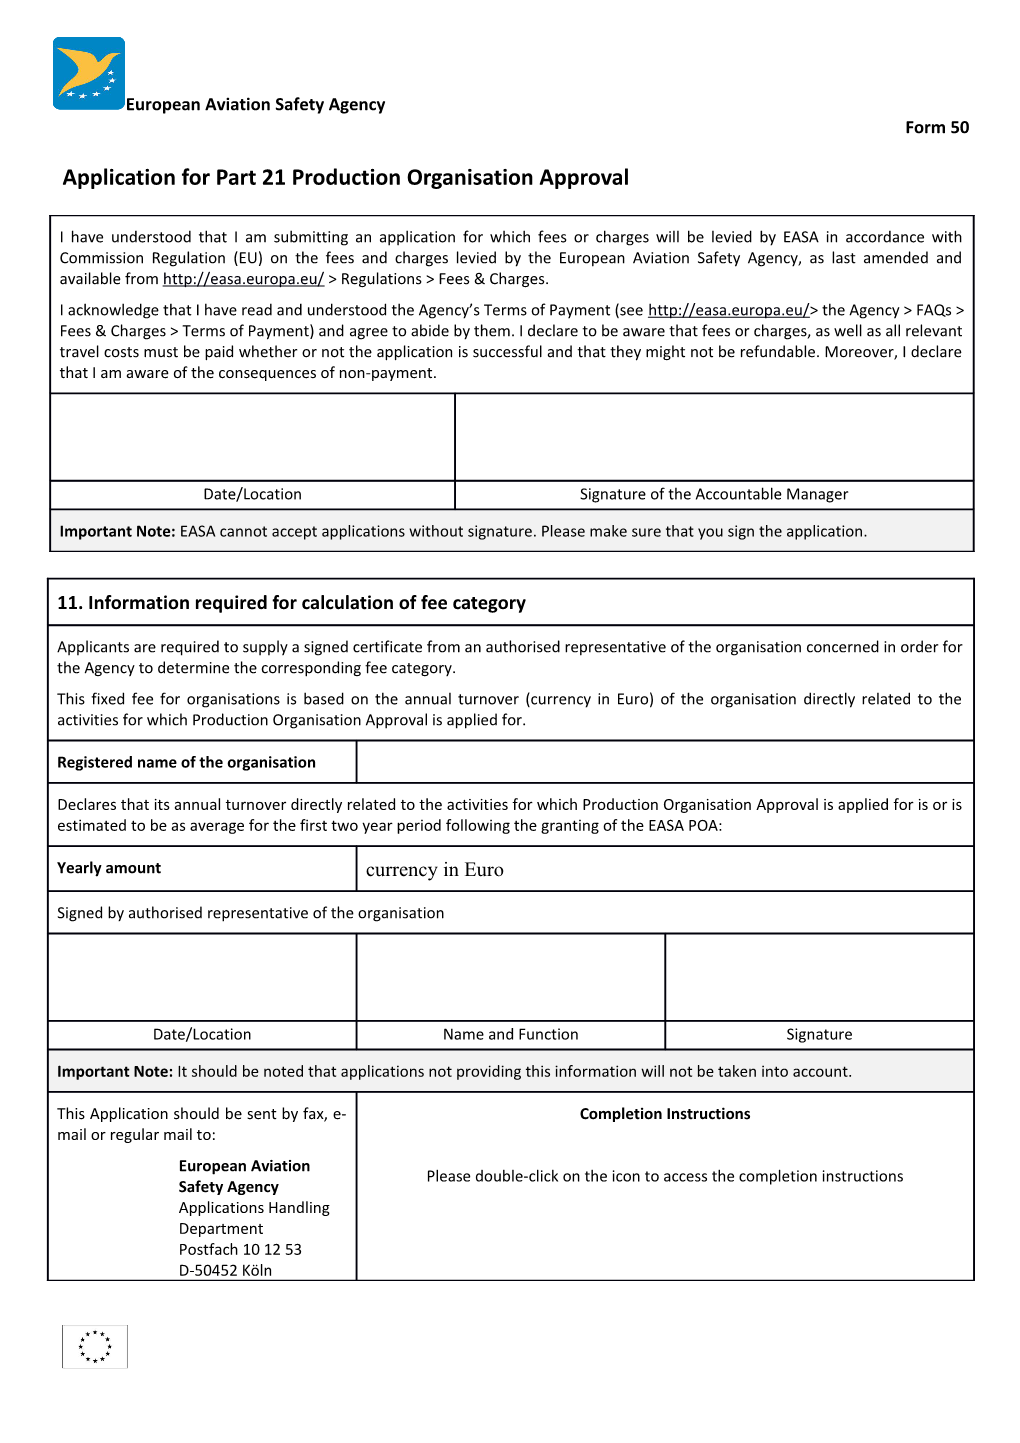 Application for Part 21 Production Organisation Approval